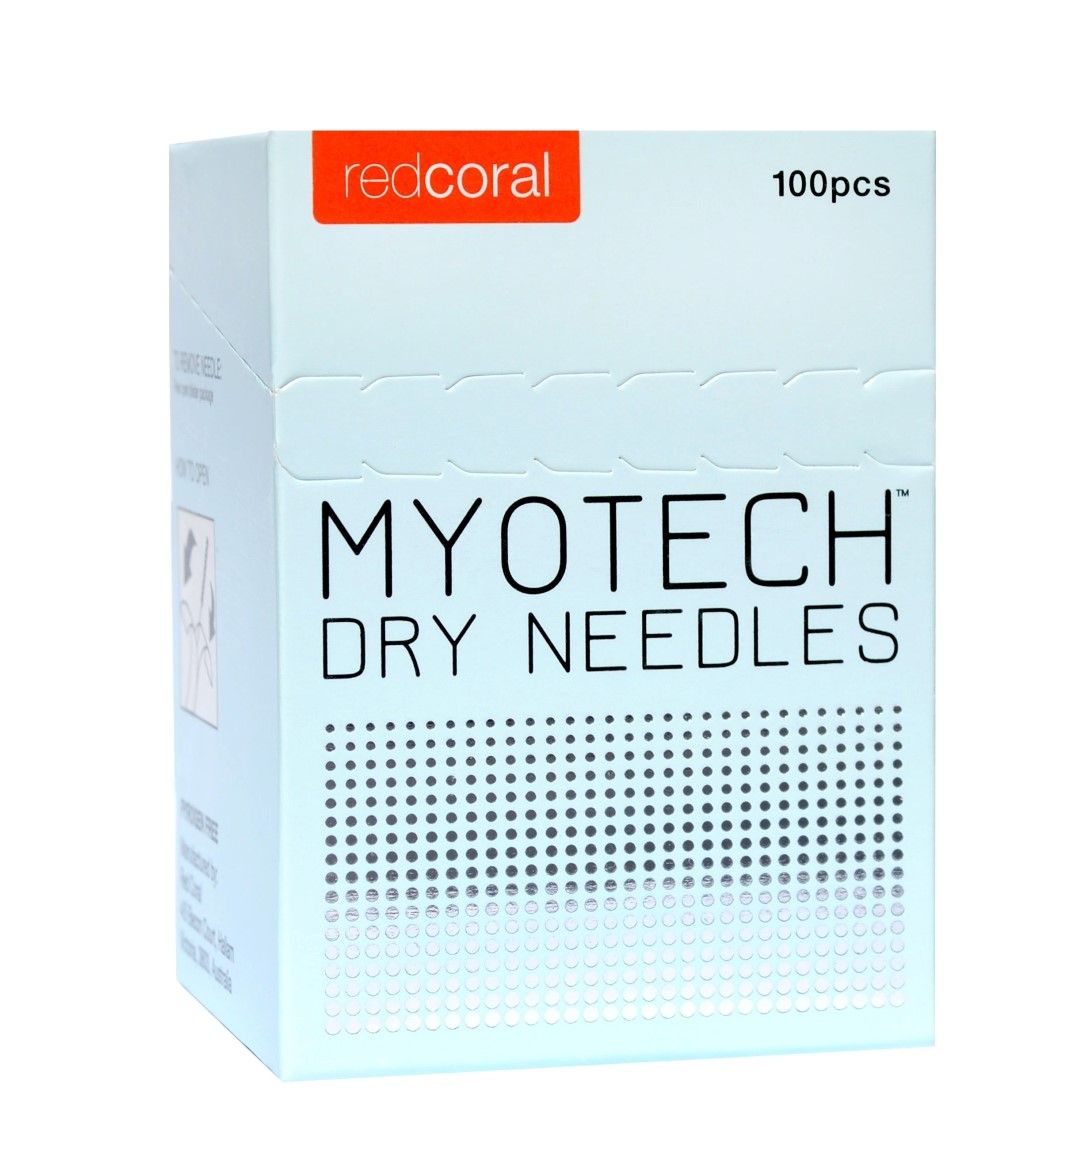 RED CORAL MYOTECH DRY ACUPUNCTURE NEEDLES photo